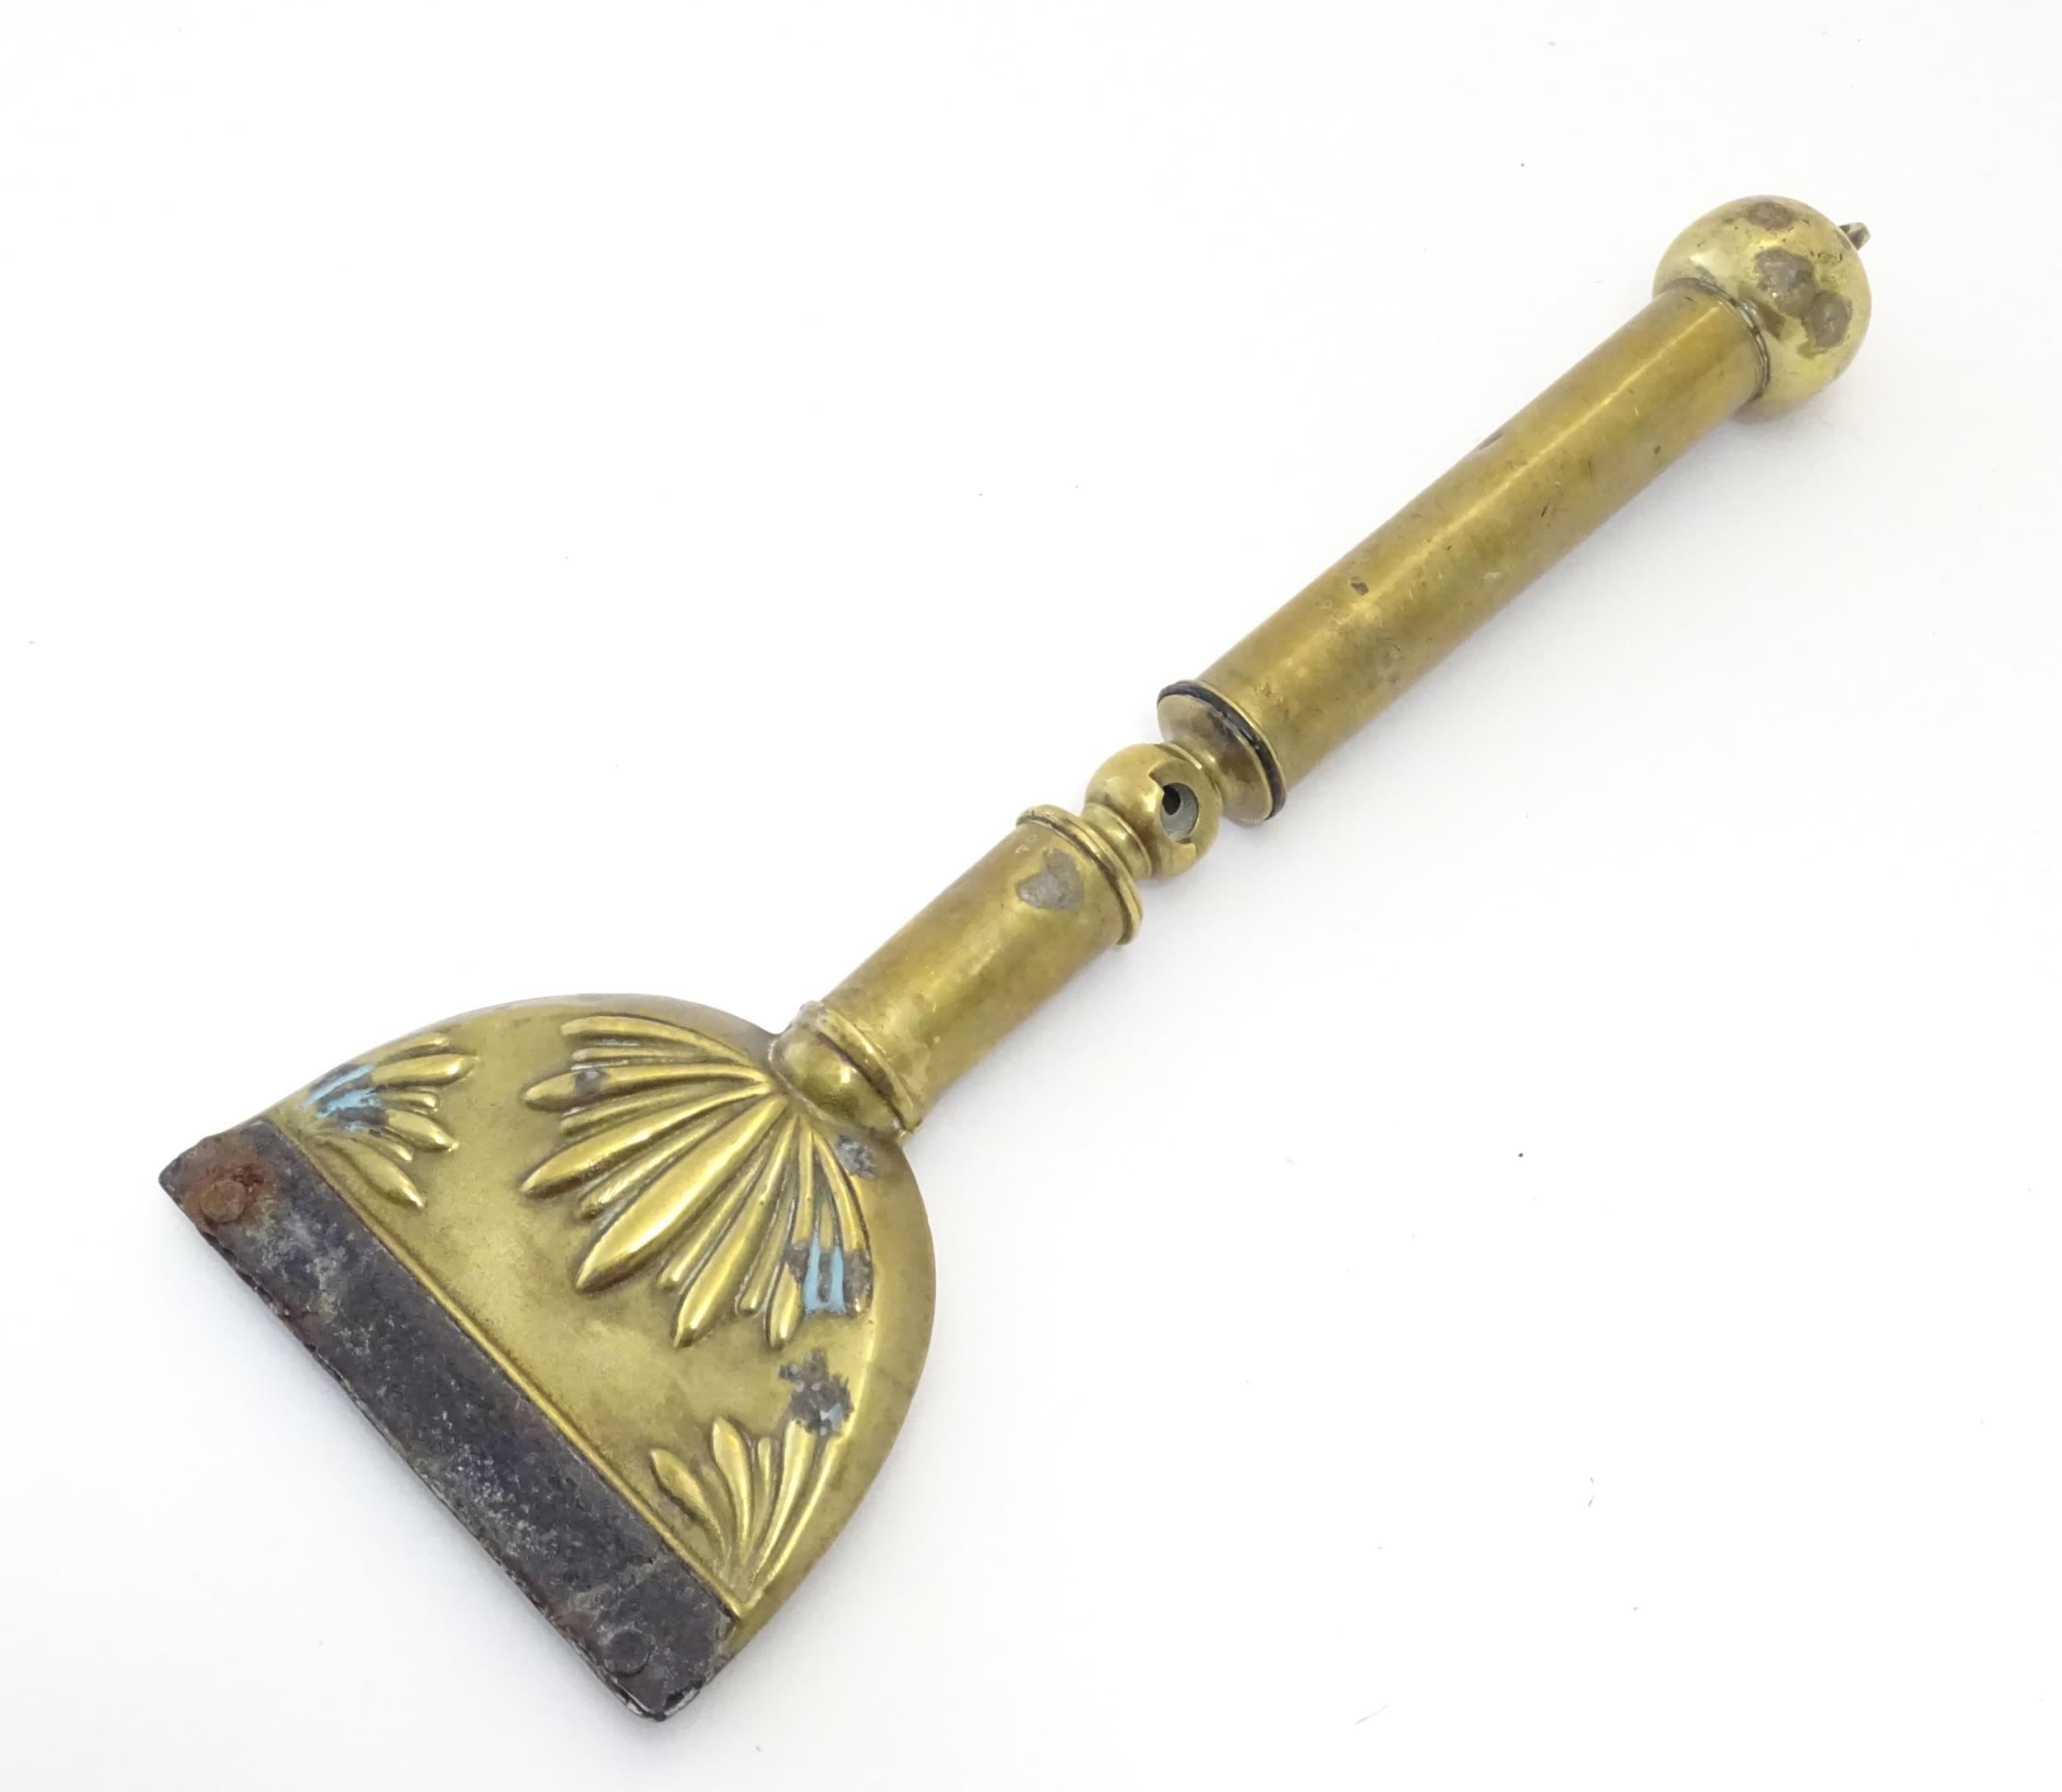 A 19thC brass horse hair singer / singeing lamp with embossed shell detail. Approx. 13 3/4" long - Image 5 of 6